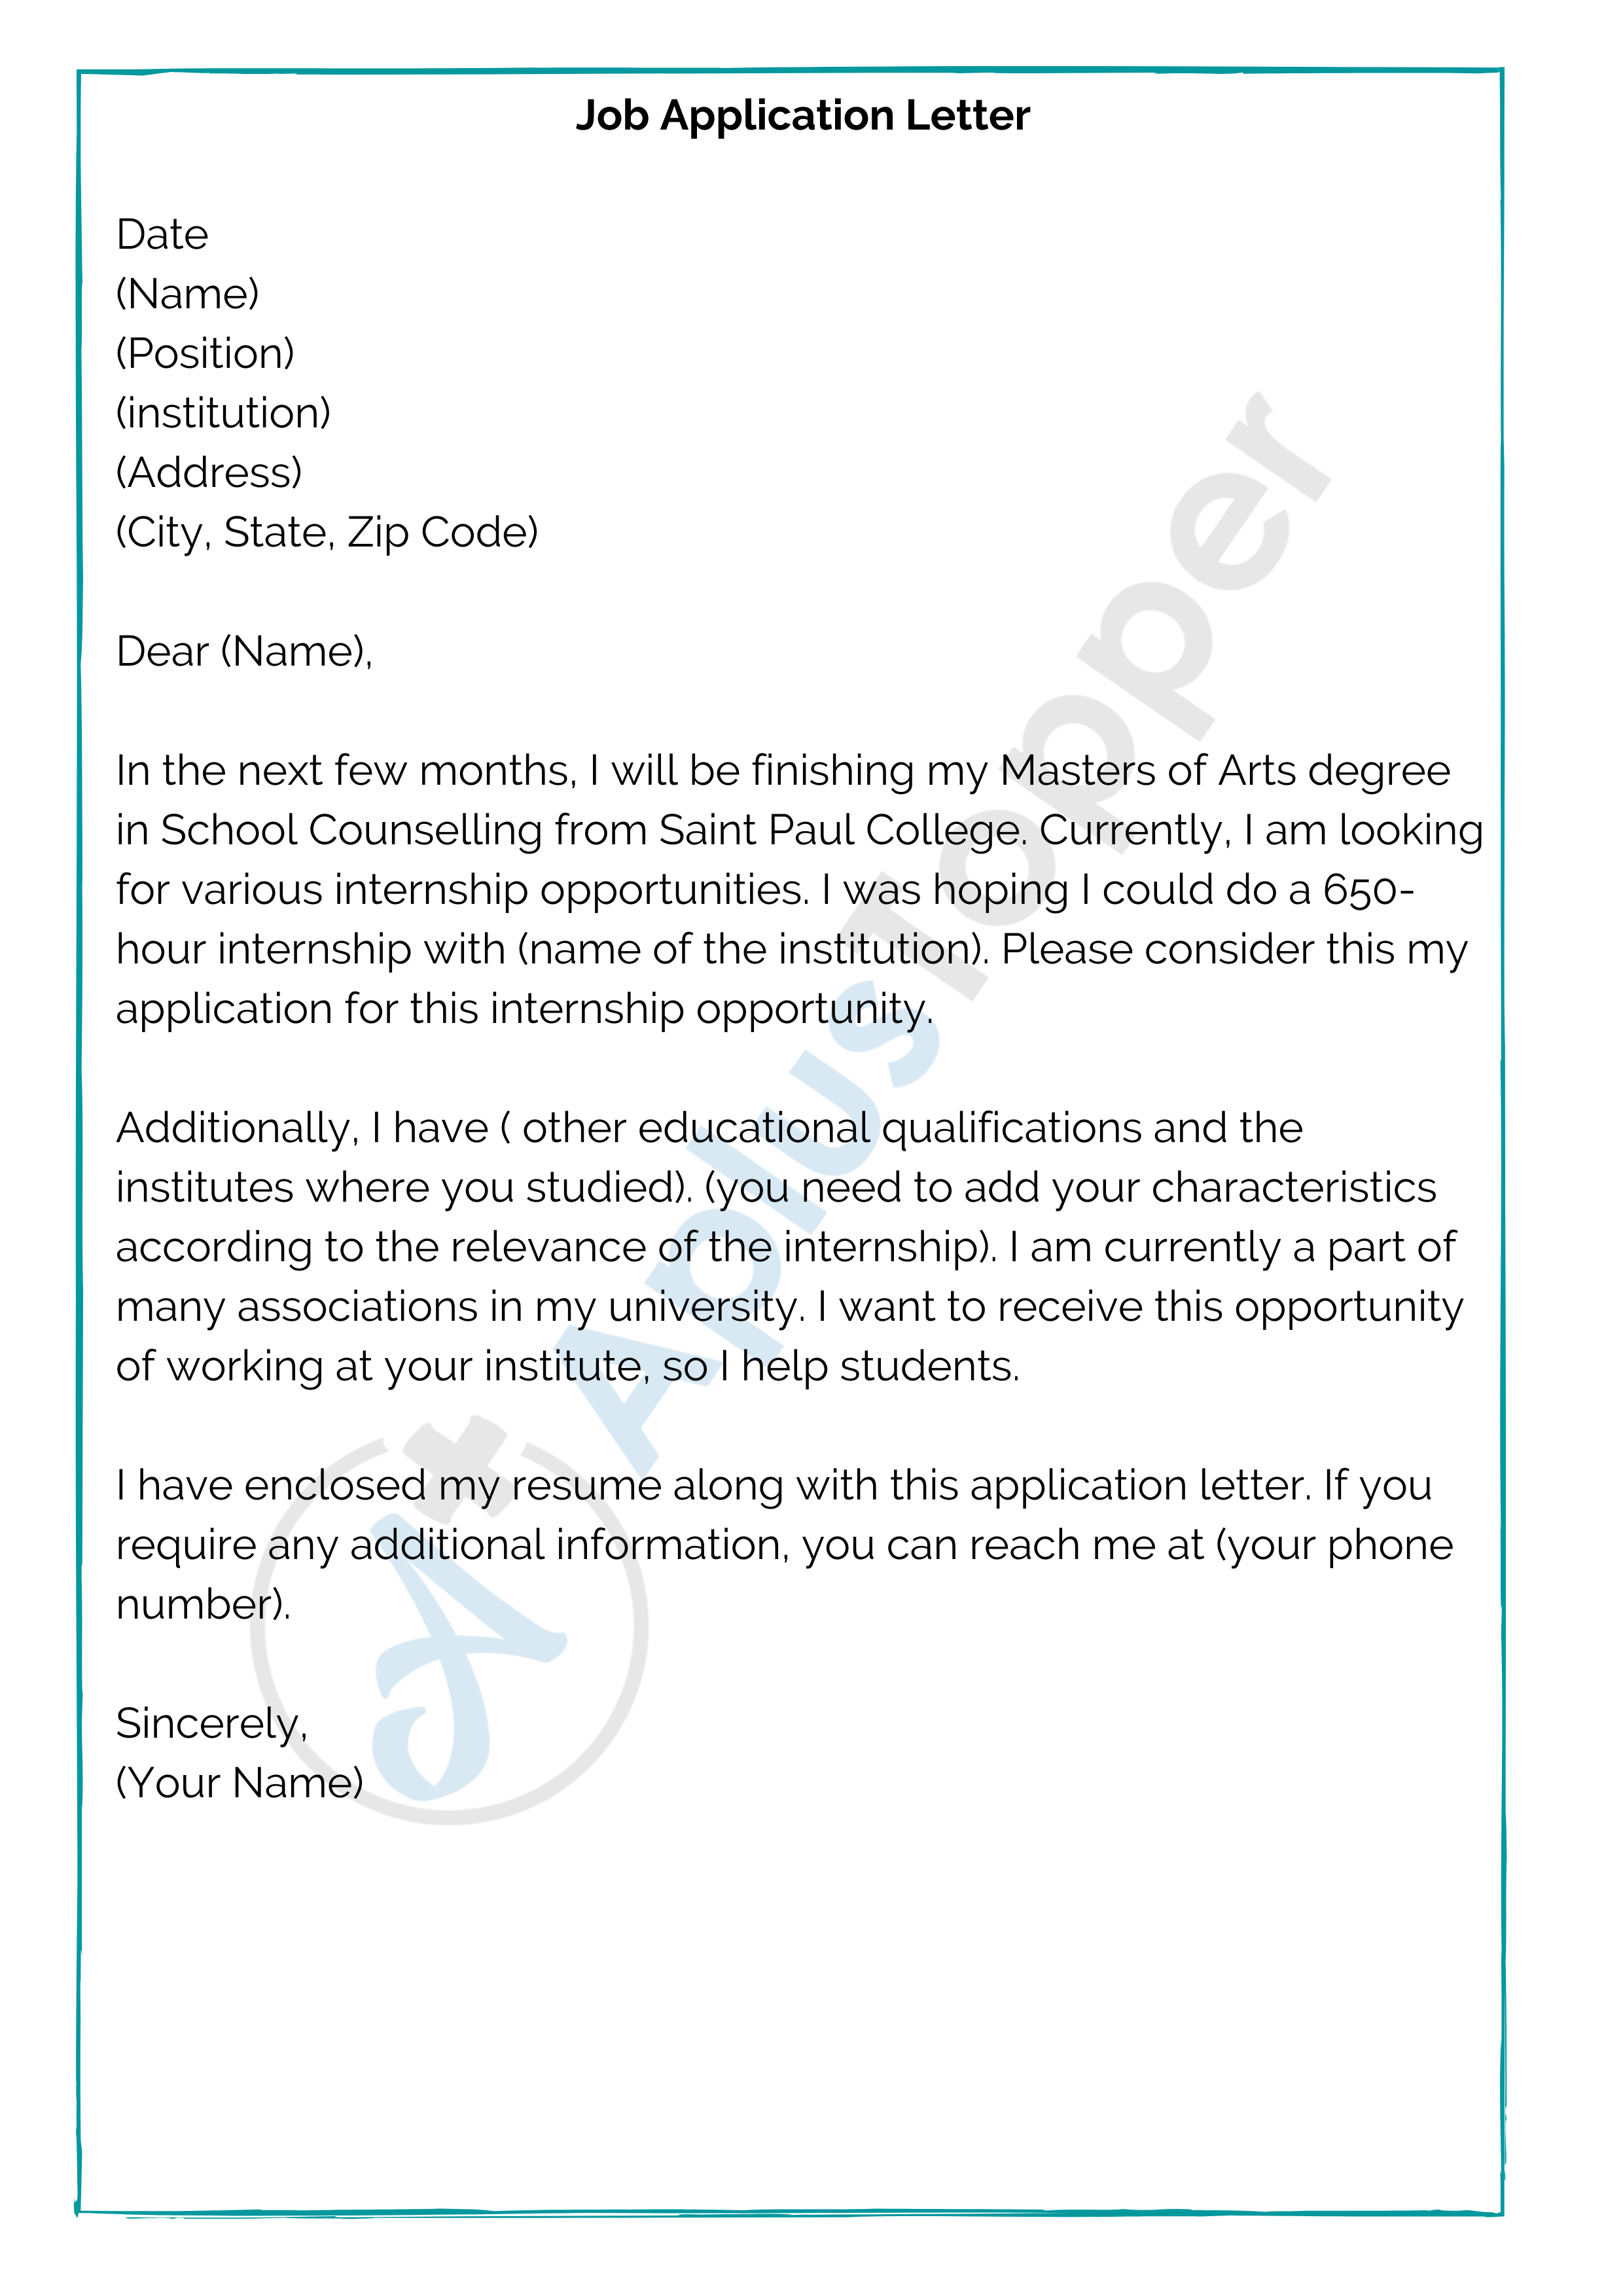 how to write an application letter heading